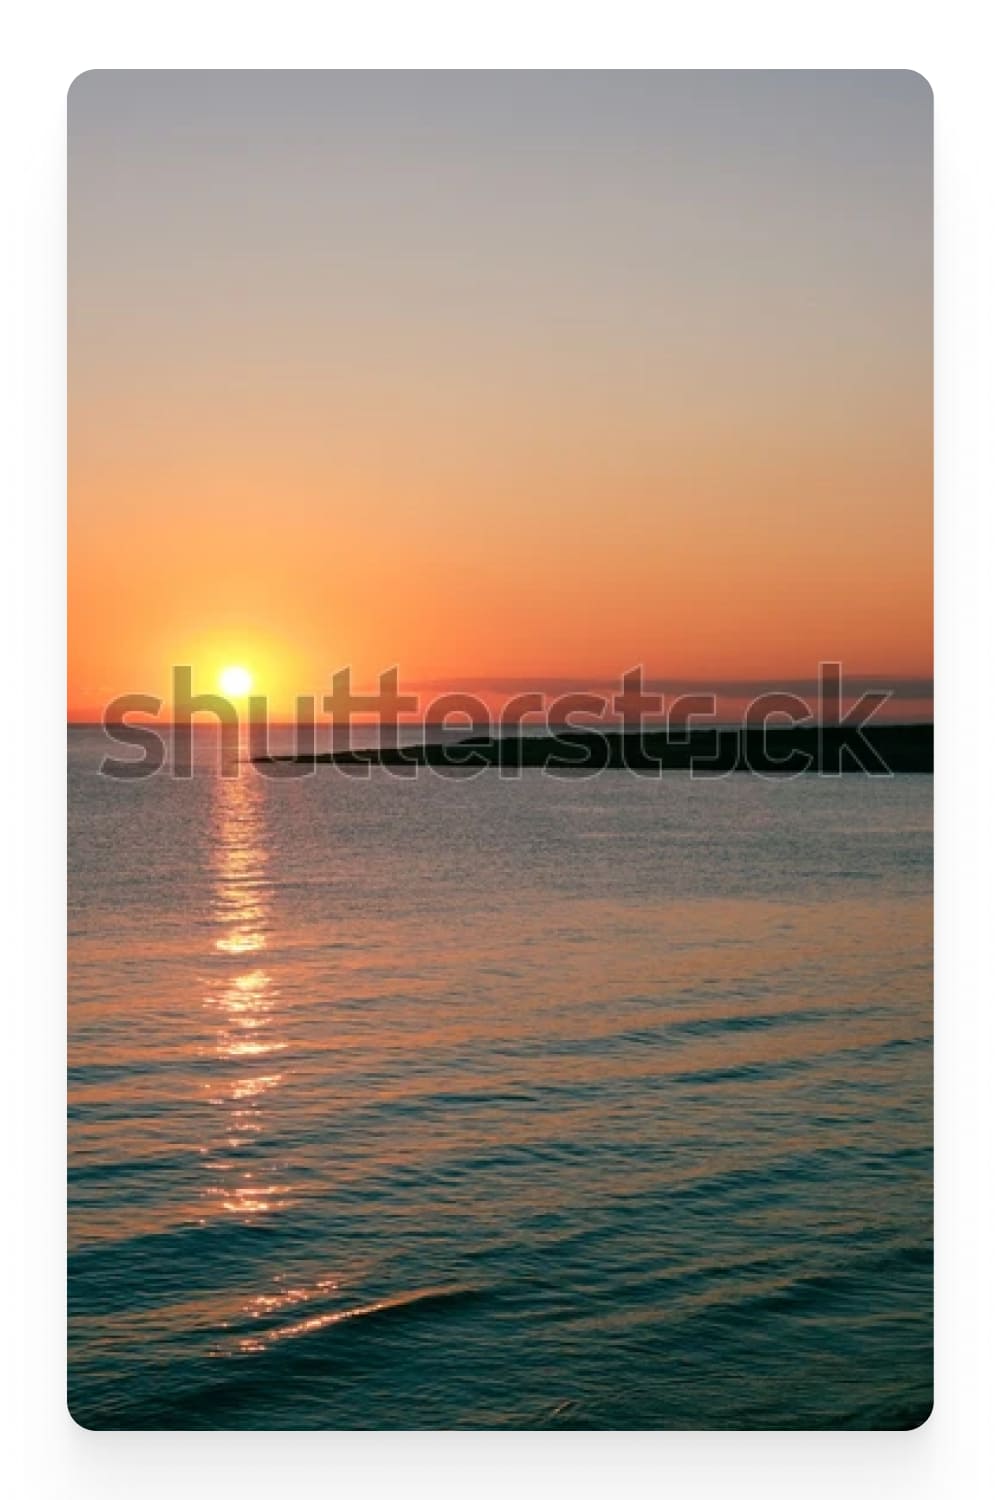 Photograph of a calm sea at sunset.